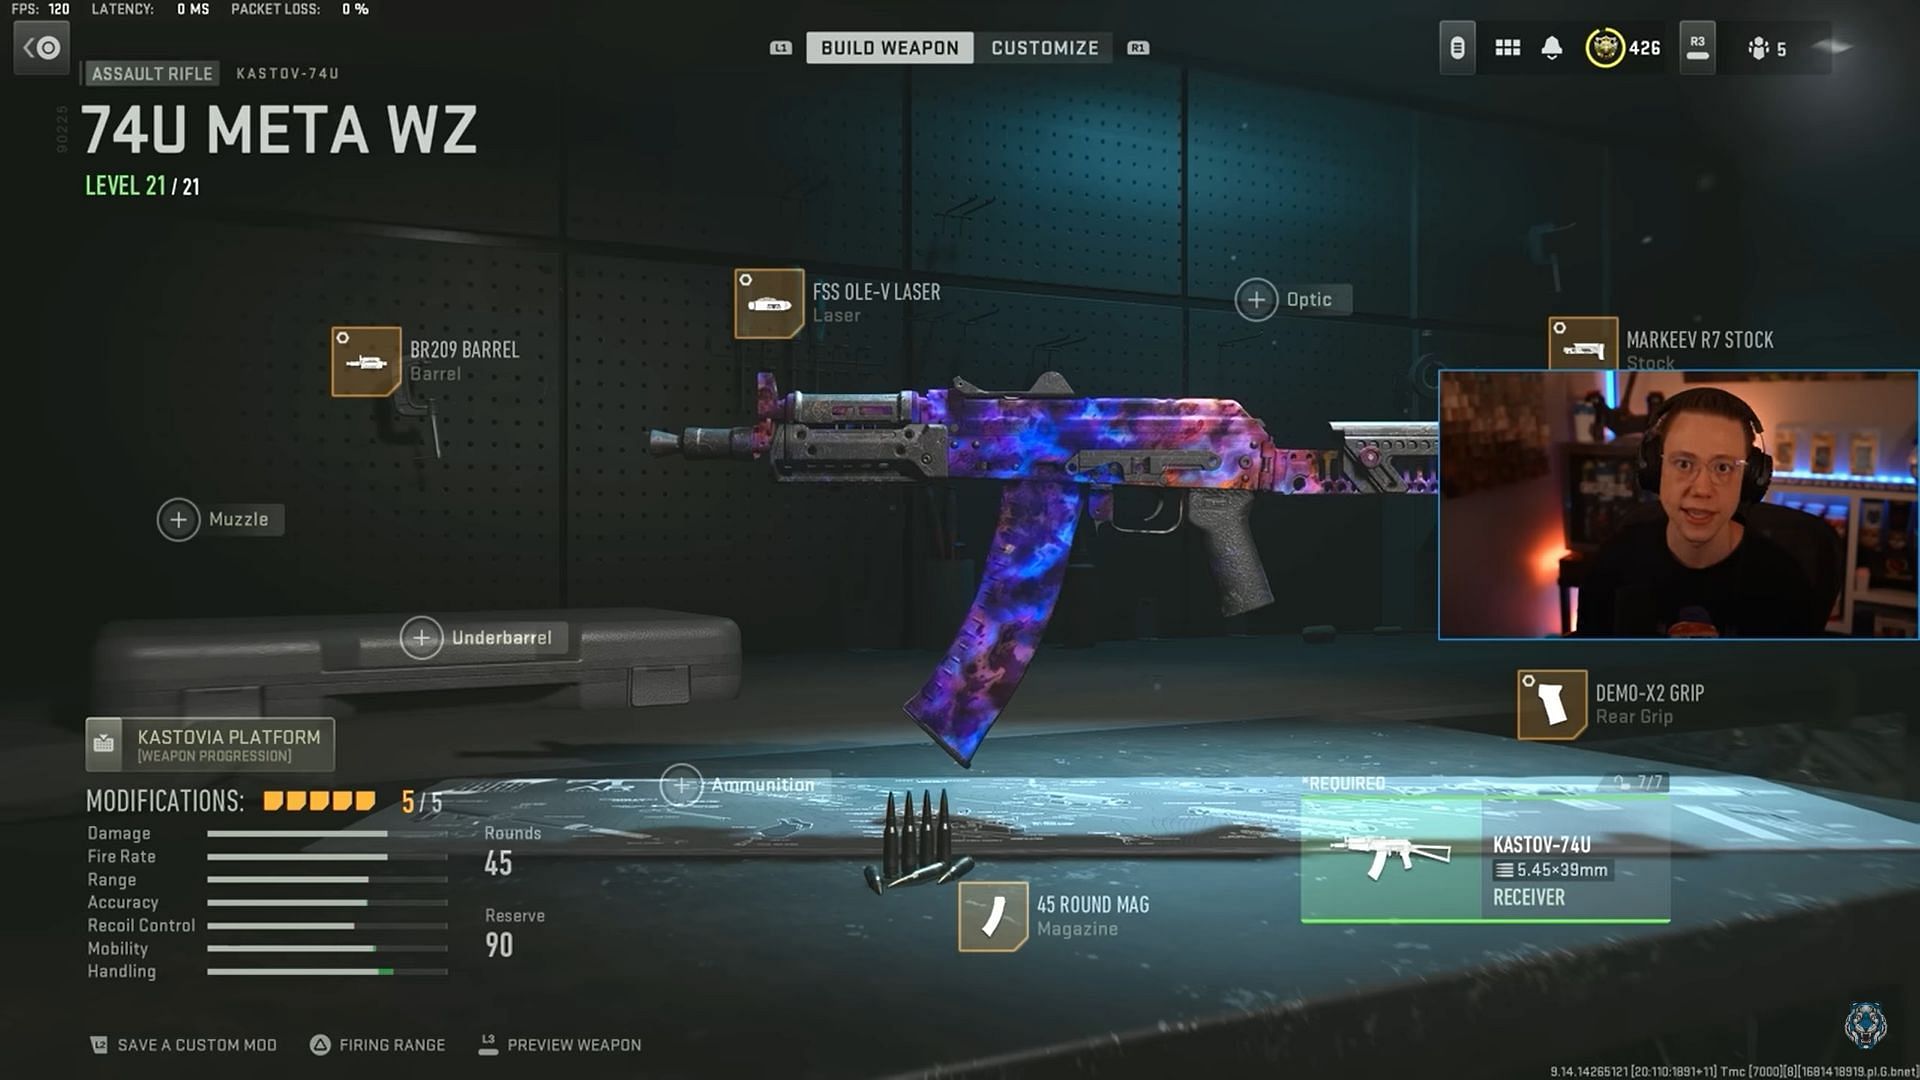 Sniper support loadout for Kastov-74u in Season 3 (Image via Activision and YouTube/WhosImmortal)